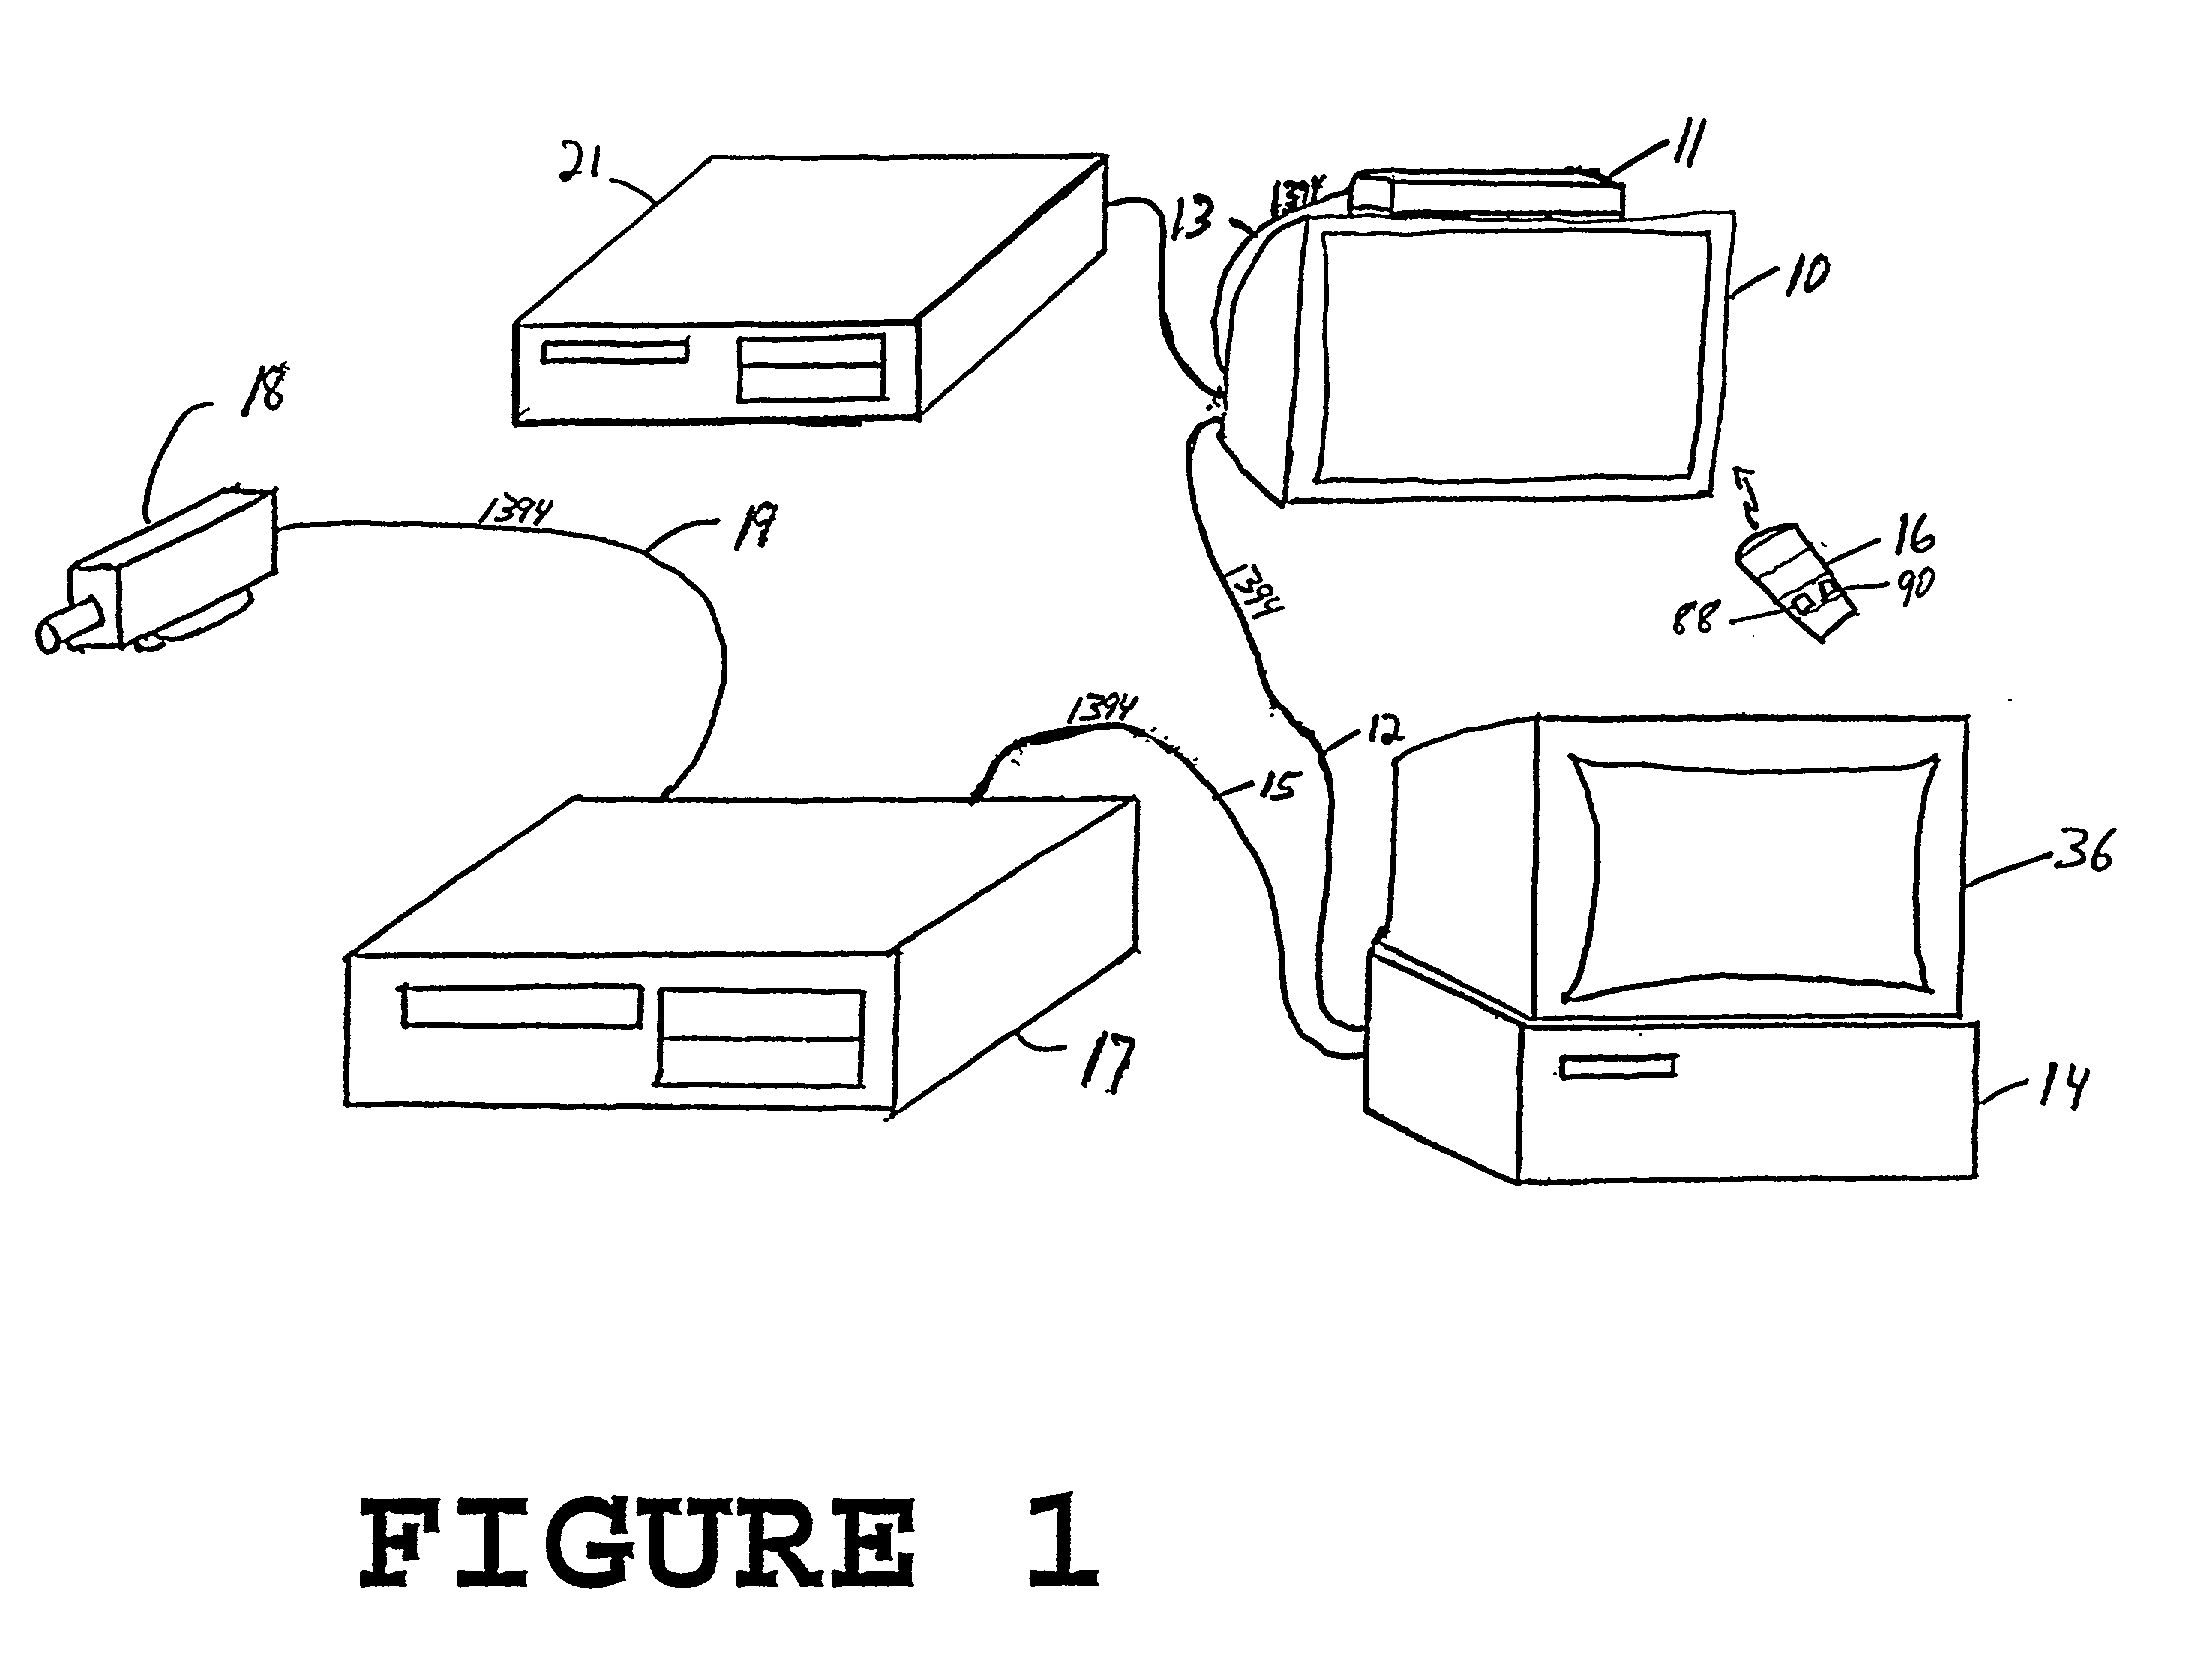 Video recording device including the ability to concurrently record and playback